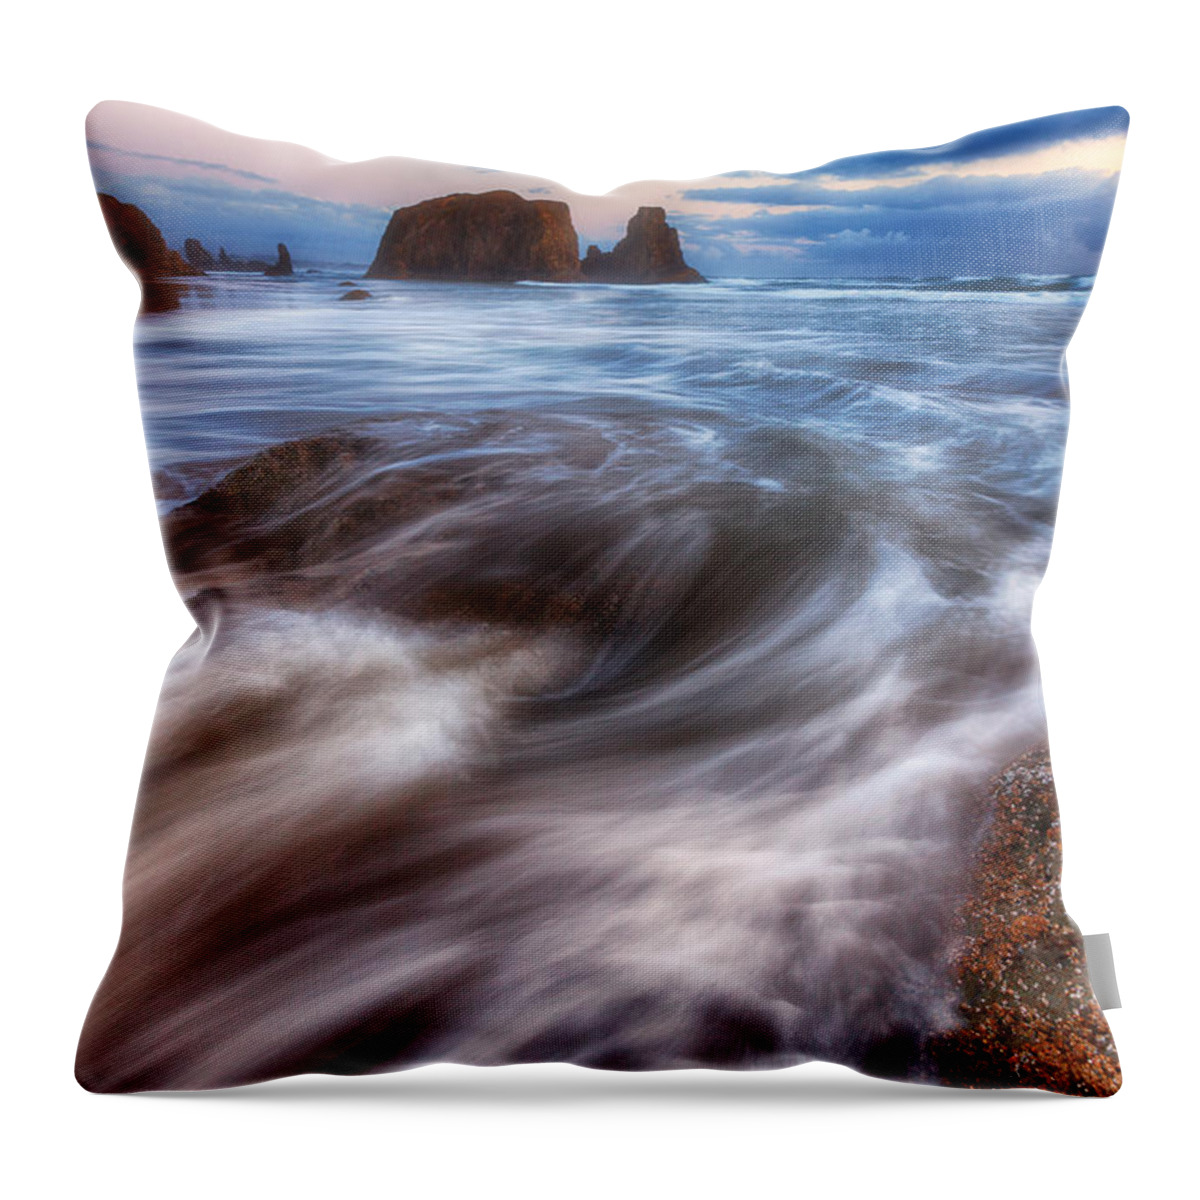 Sunset Throw Pillow featuring the photograph Coastal Flow by Darren White